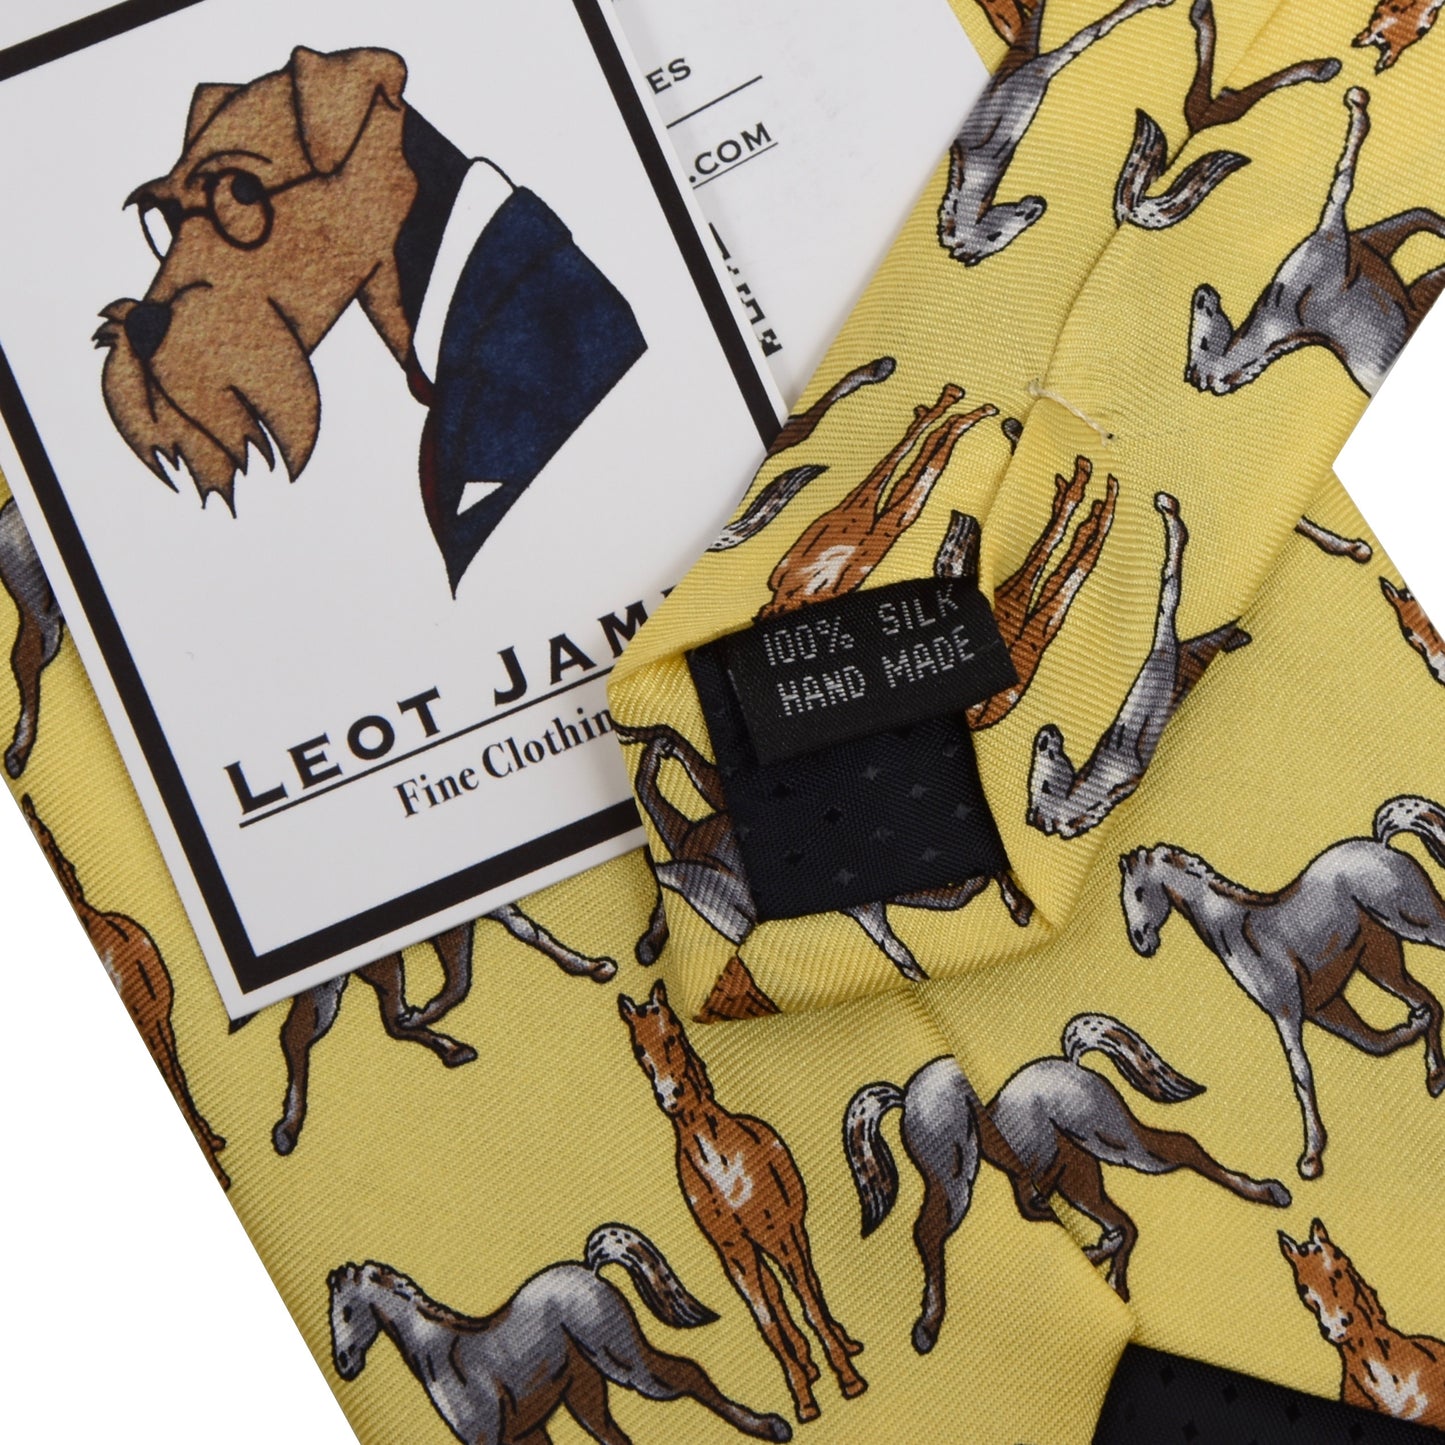 Horse Themed Printed Silk Tie - Yellow